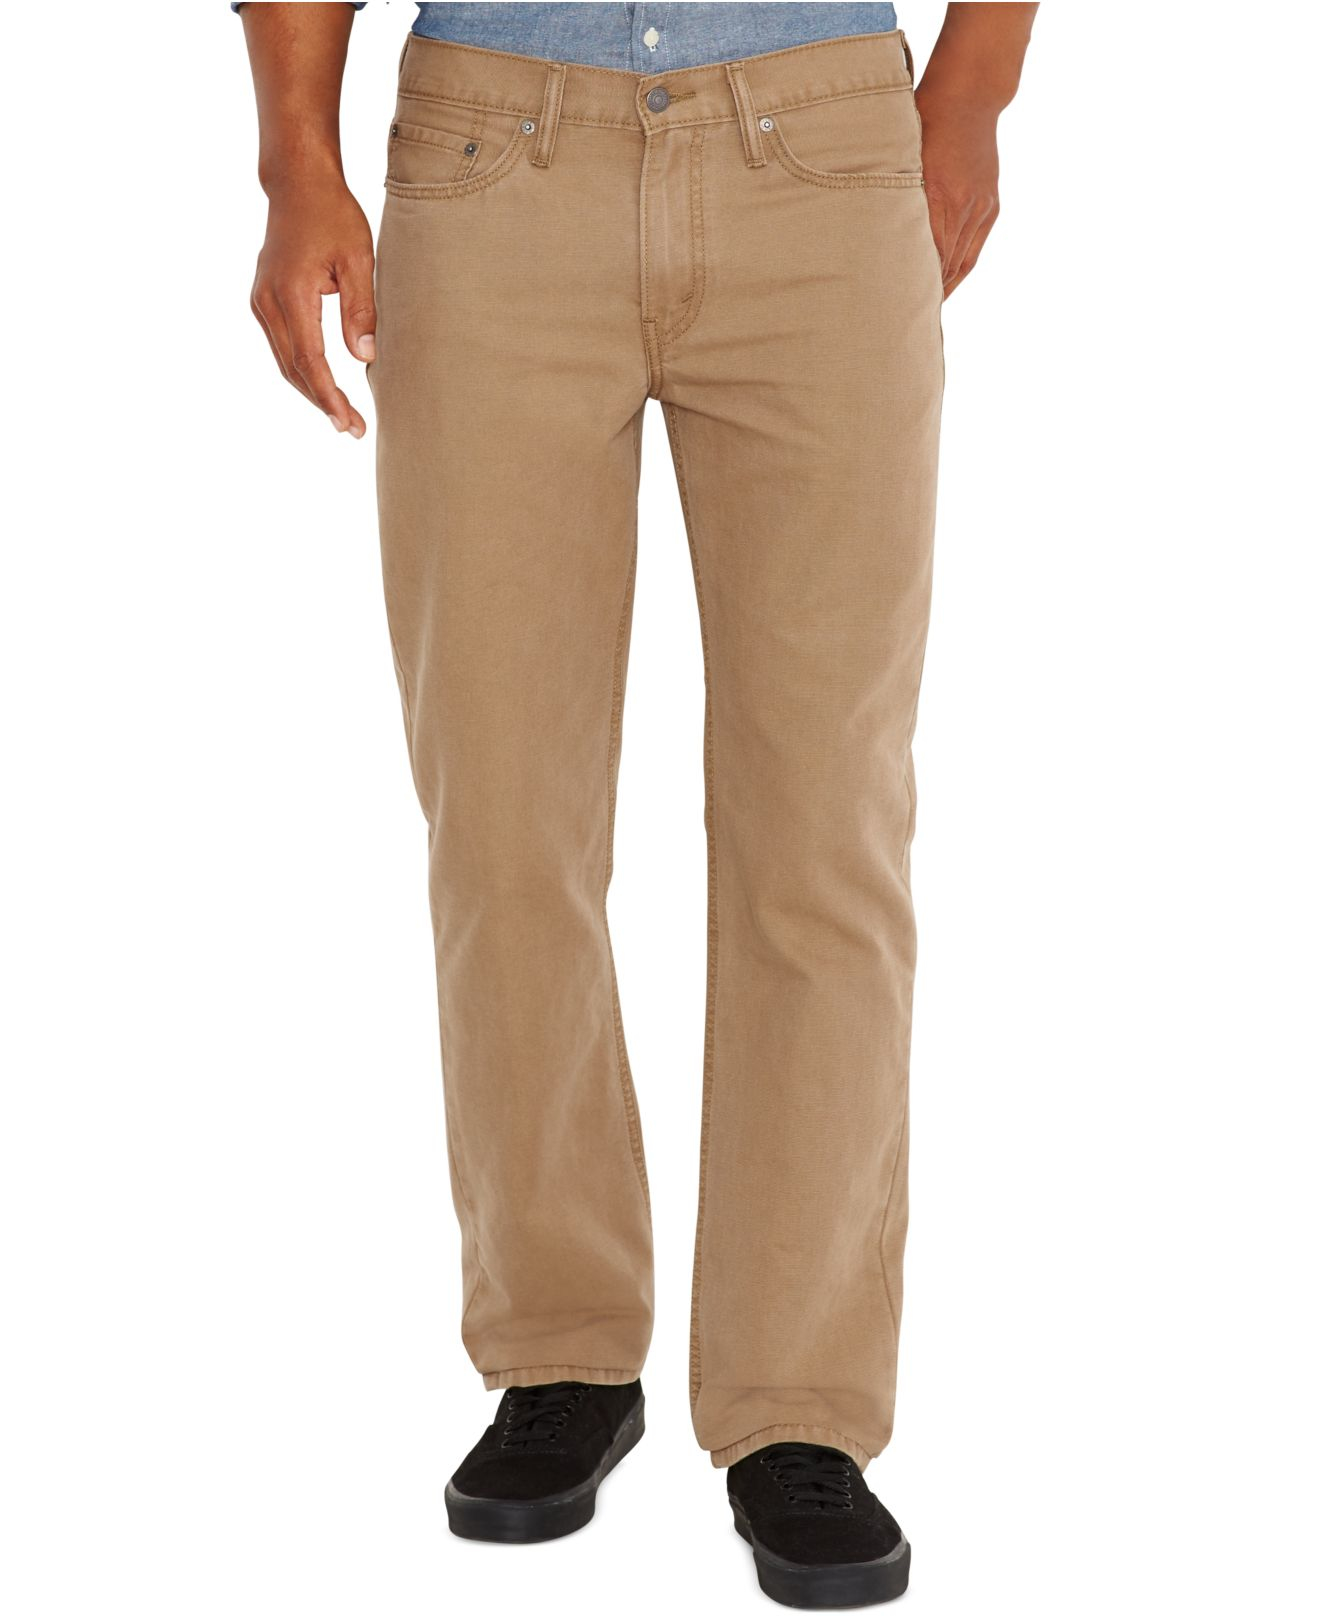 Levi's 514 Straight Khaki Padox Canvas Twill Pants in Beige for Men